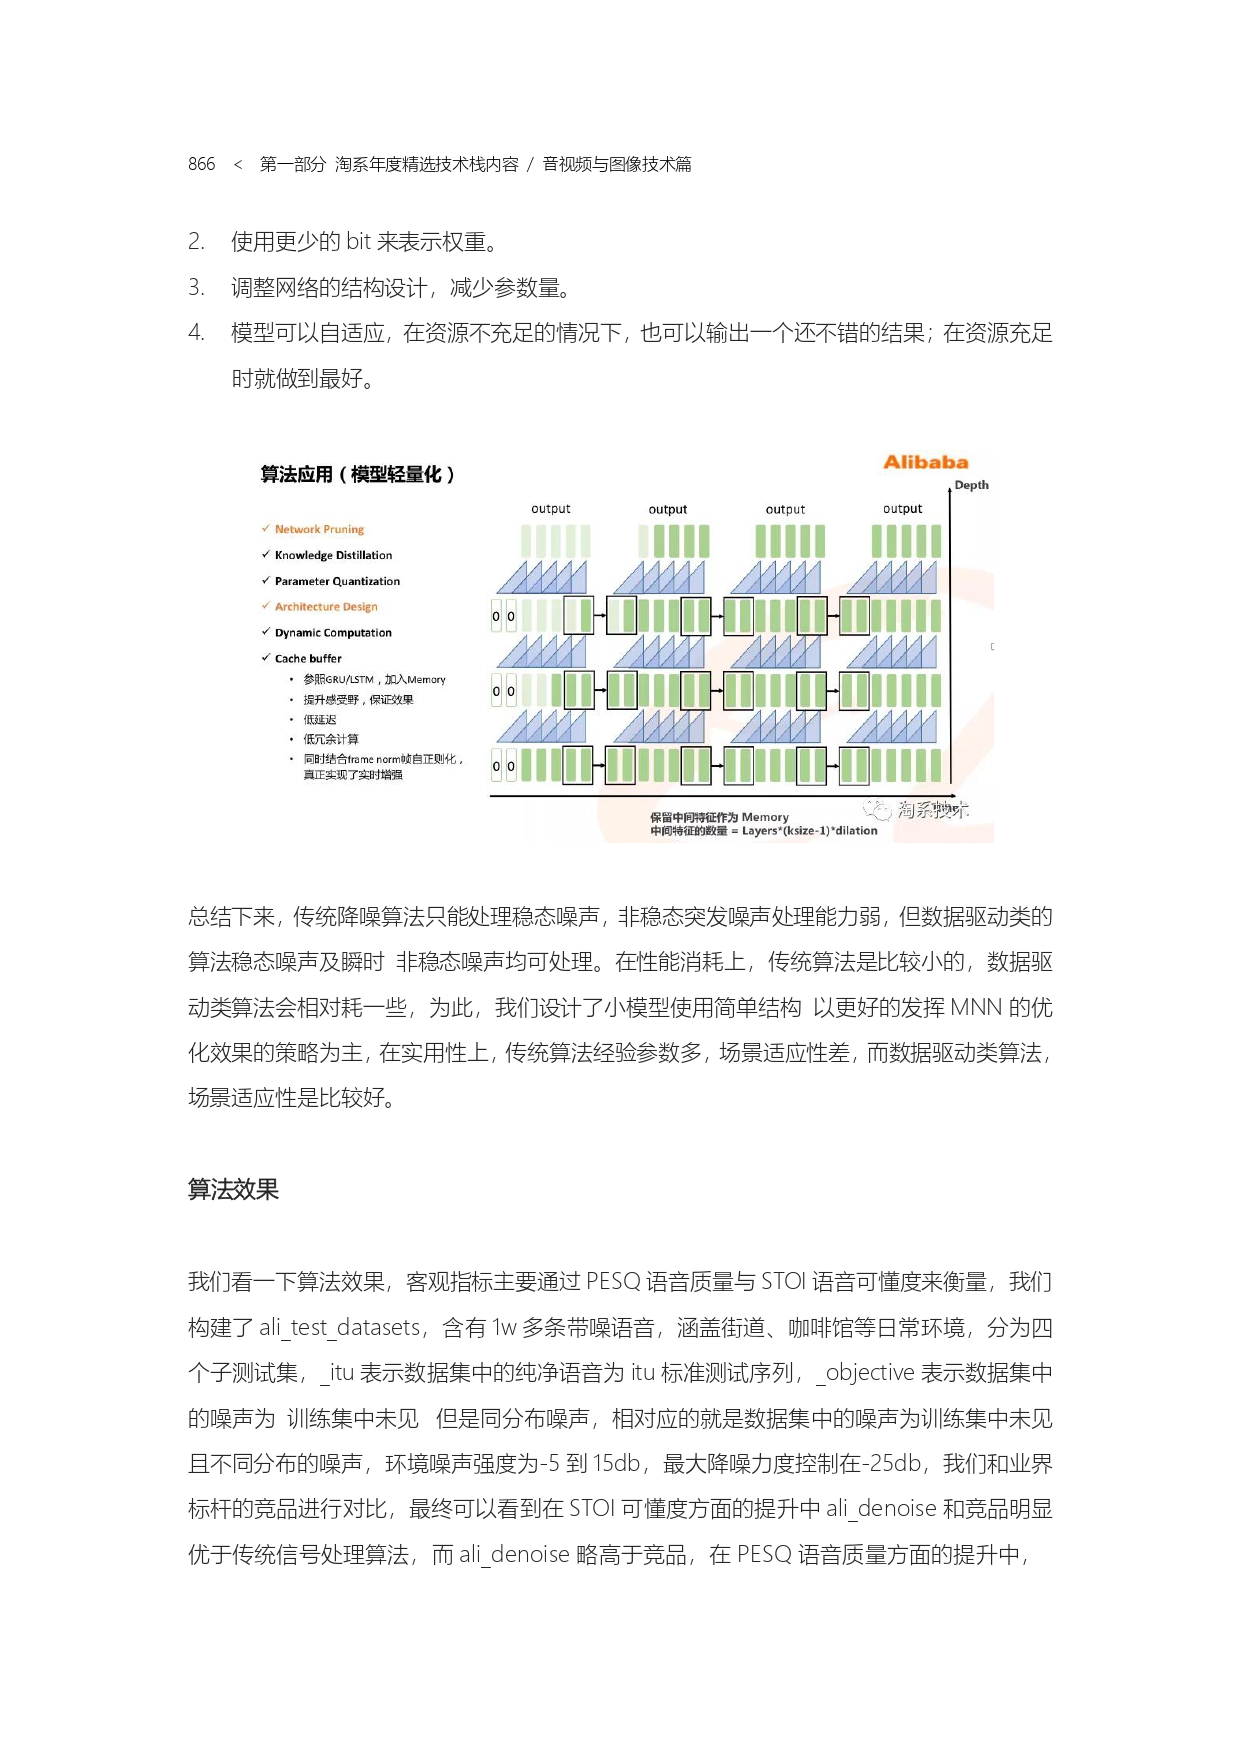 The Complete Works of Tao Technology 2020-571-1189-1-300_page-0296.jpg